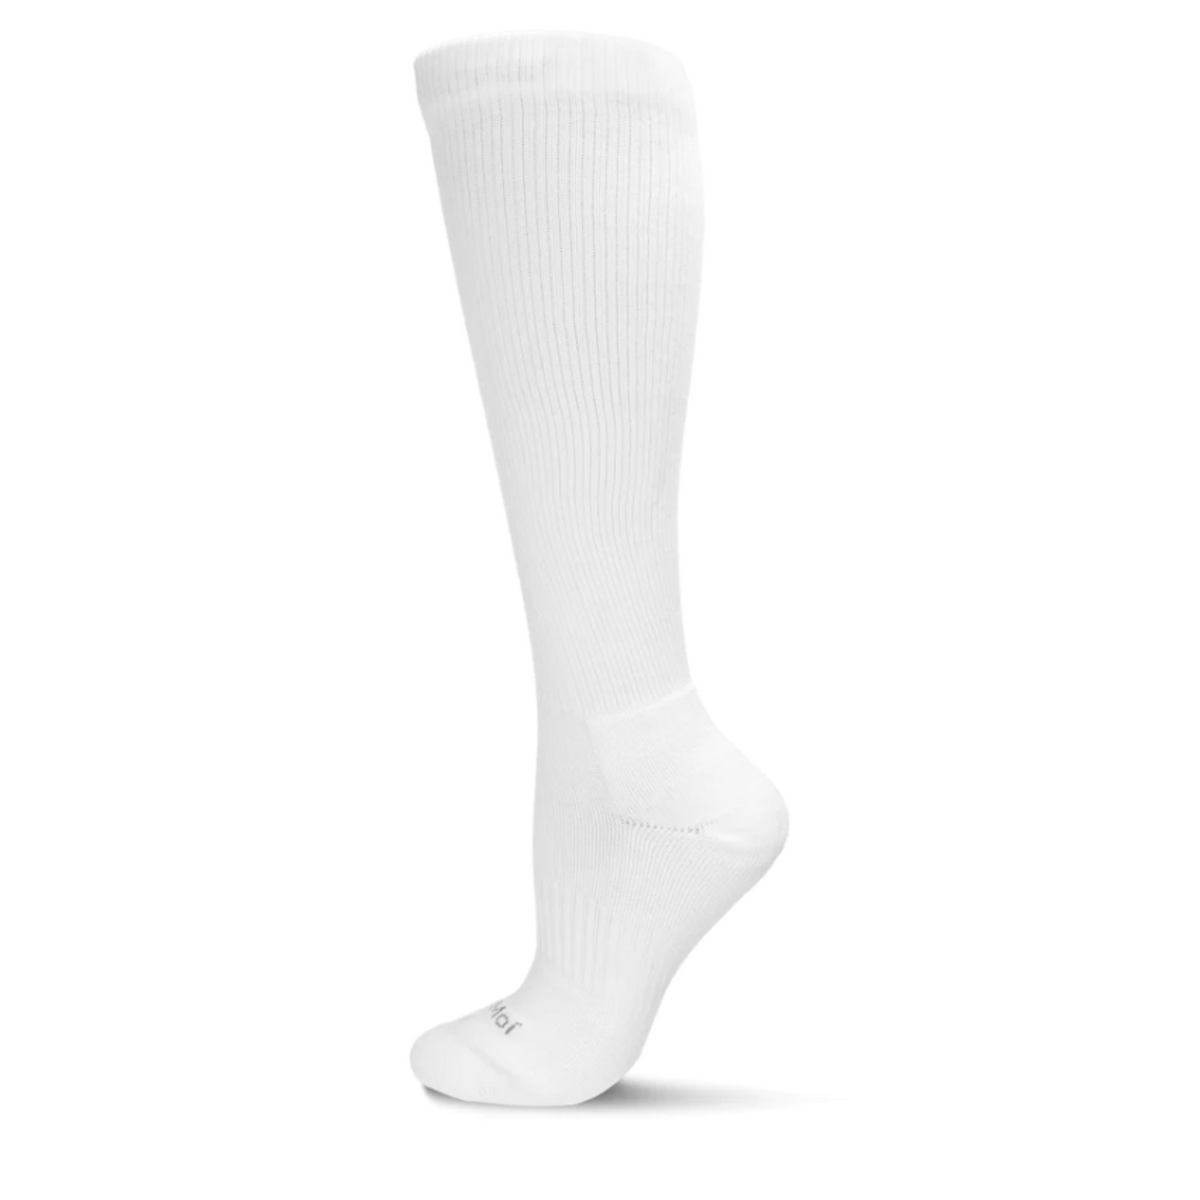 MeMoi Classic Athletic Cushion Sole Cotton Moderate Graduated Compression in white from side